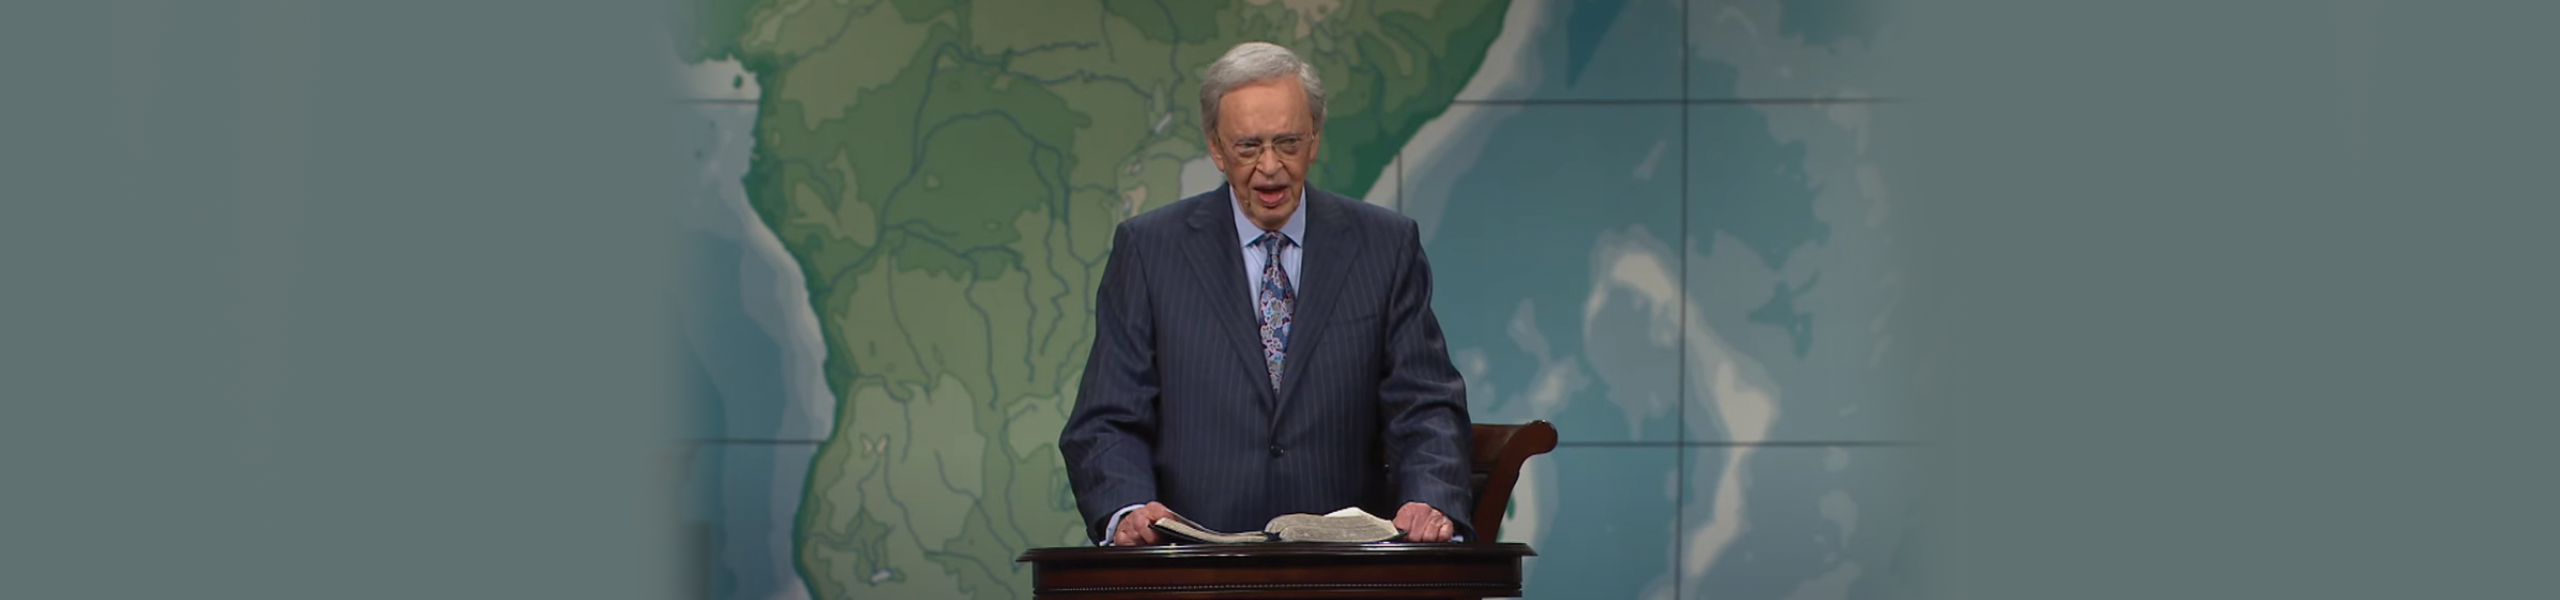 The Convictions By Which We Live | Charles Stanley